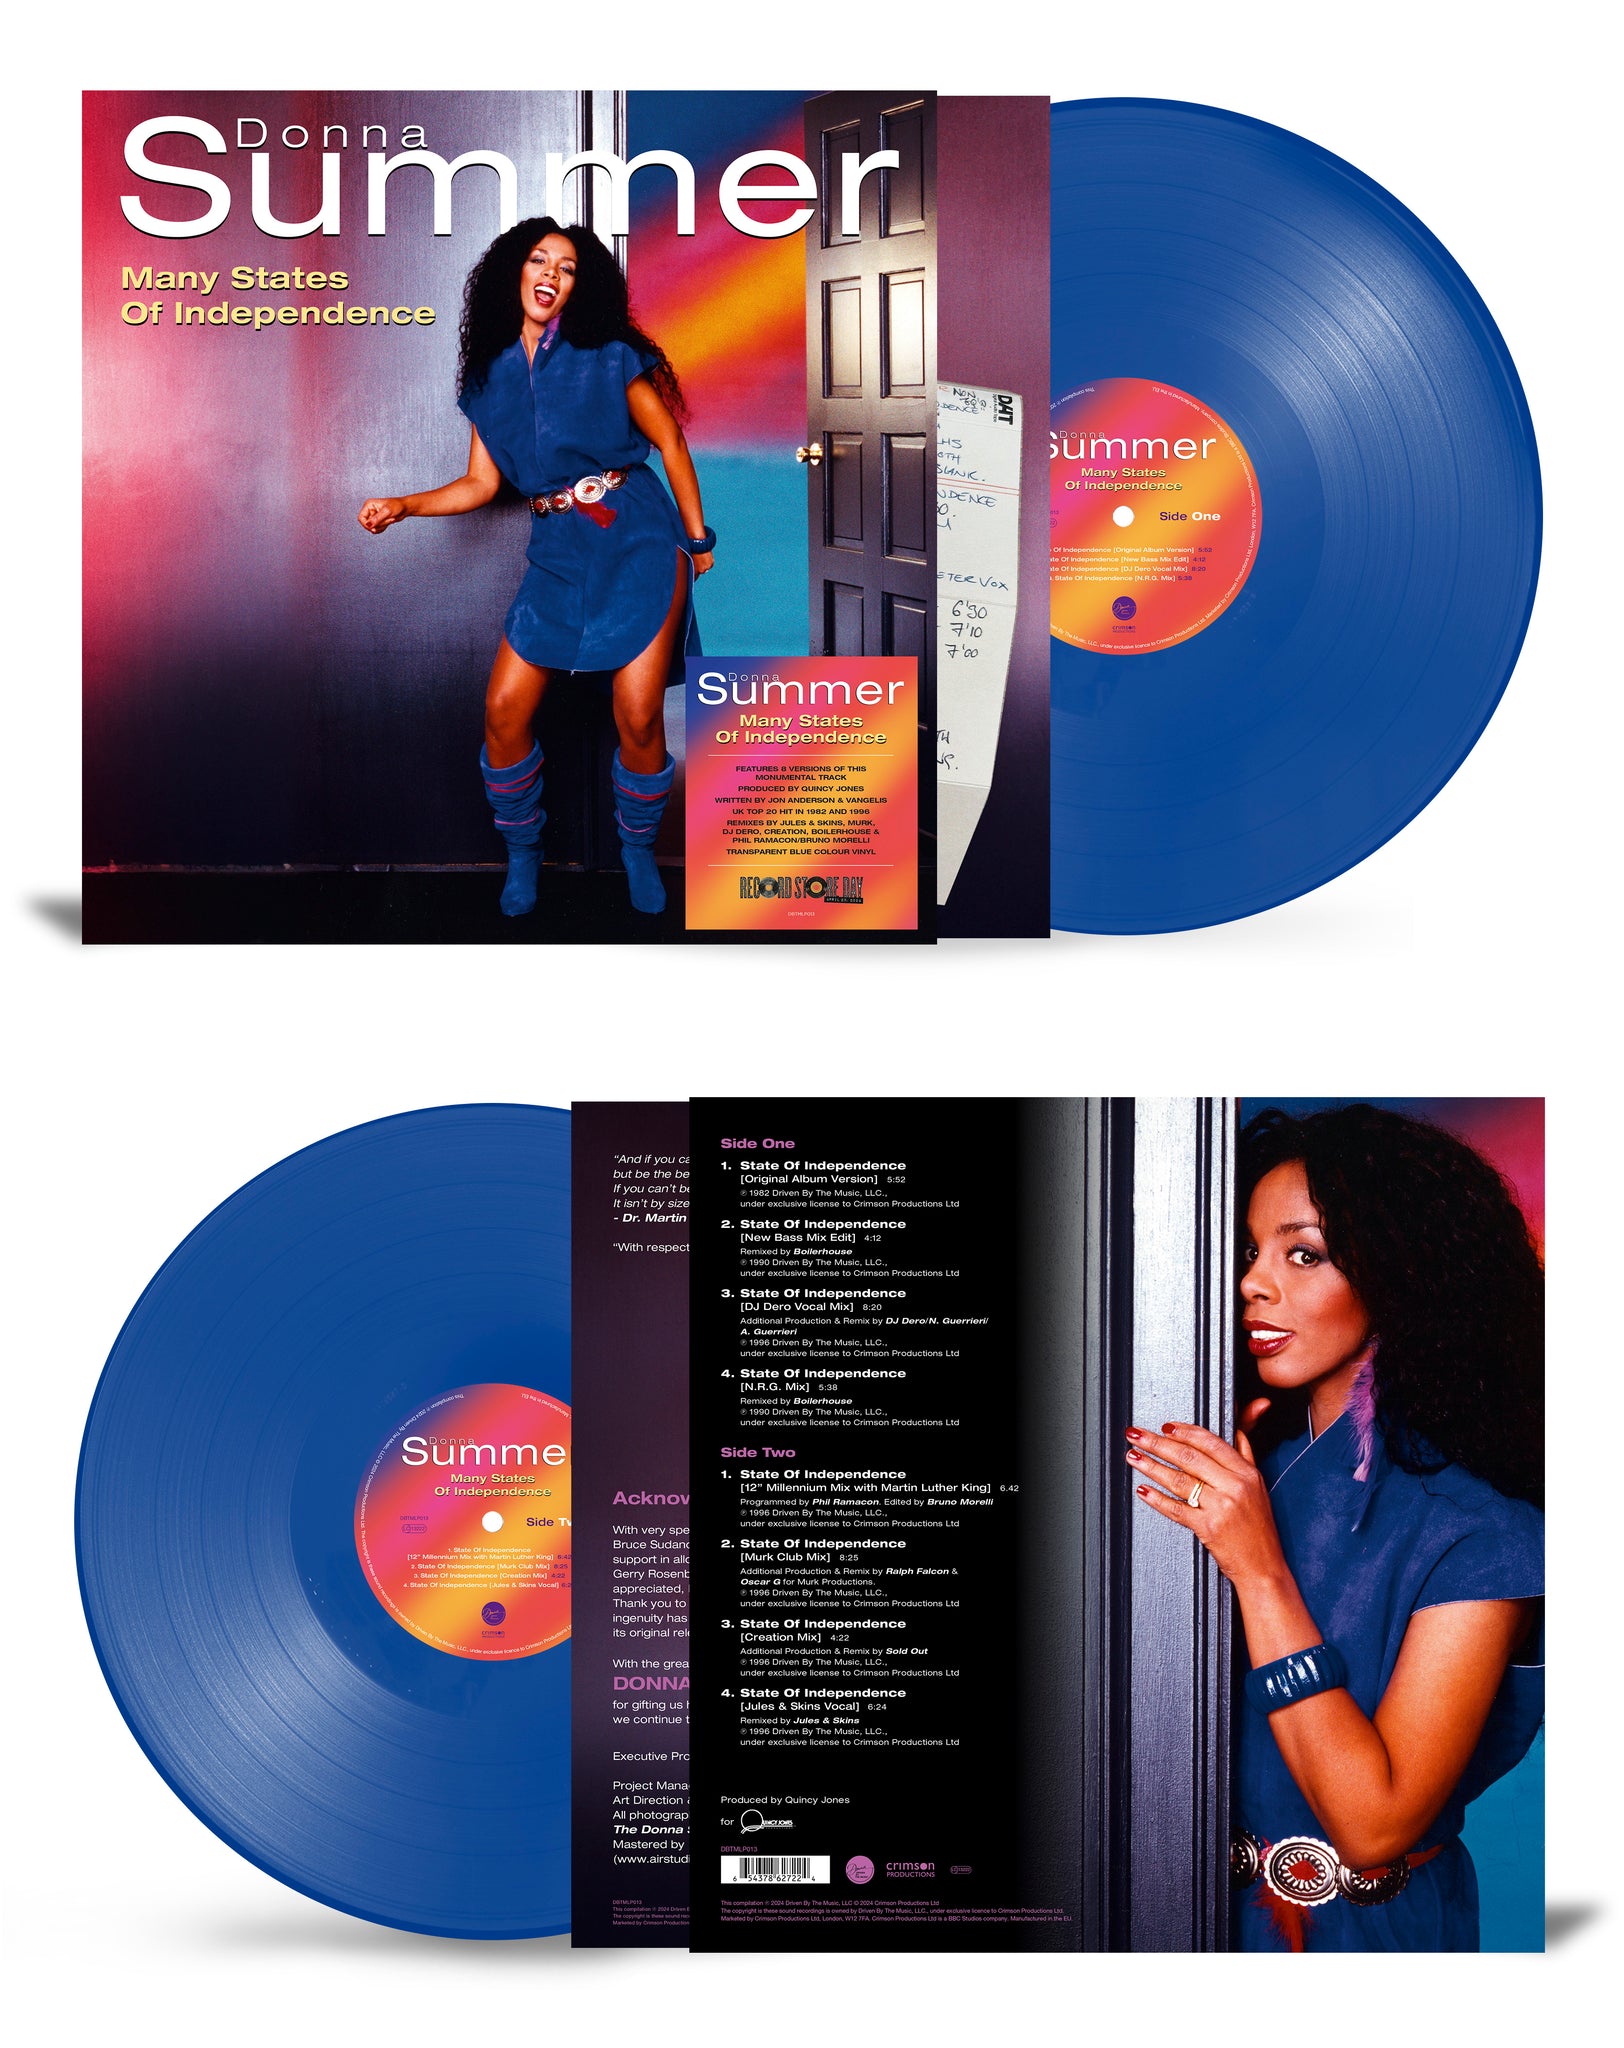 Donna Summer - "Many" States Of Independence - BLUE COLOURED VINYL (RSD24)